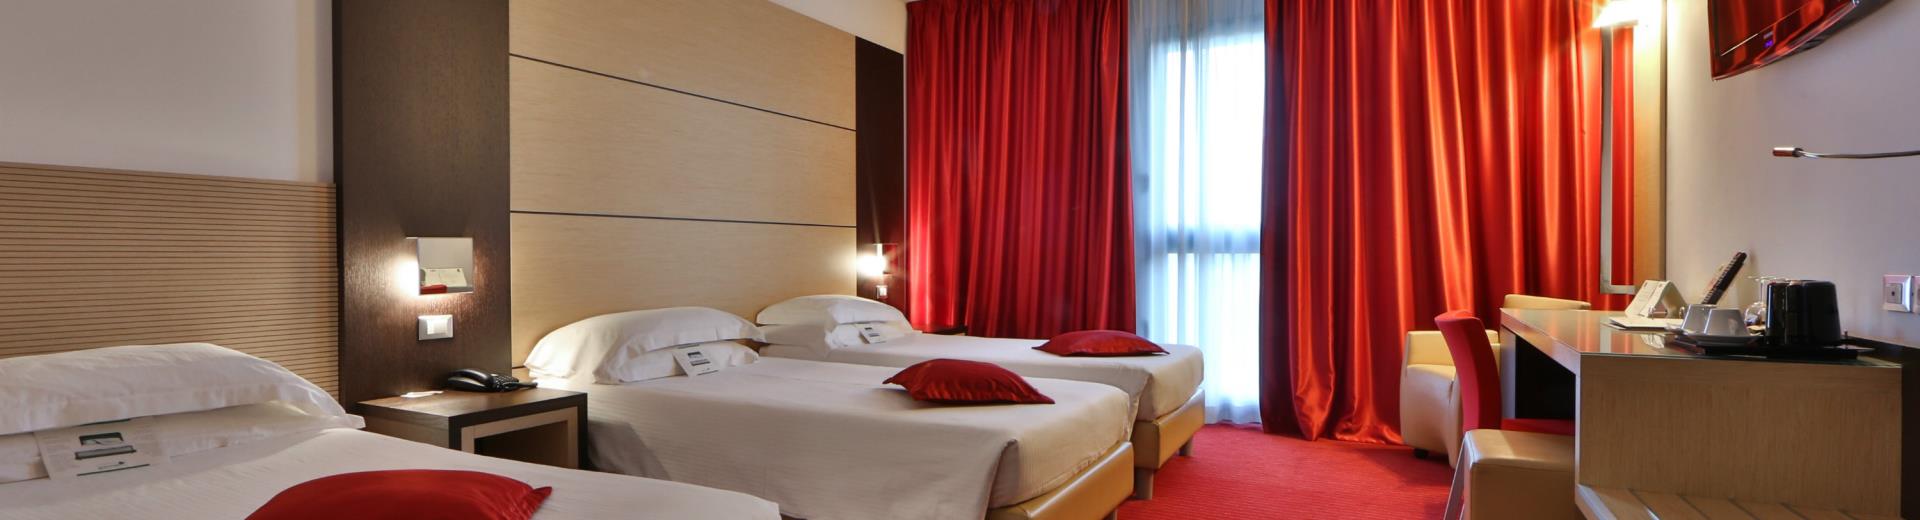 Book a room in Padua for you and a friend at Best Western Galileo Padua Premium